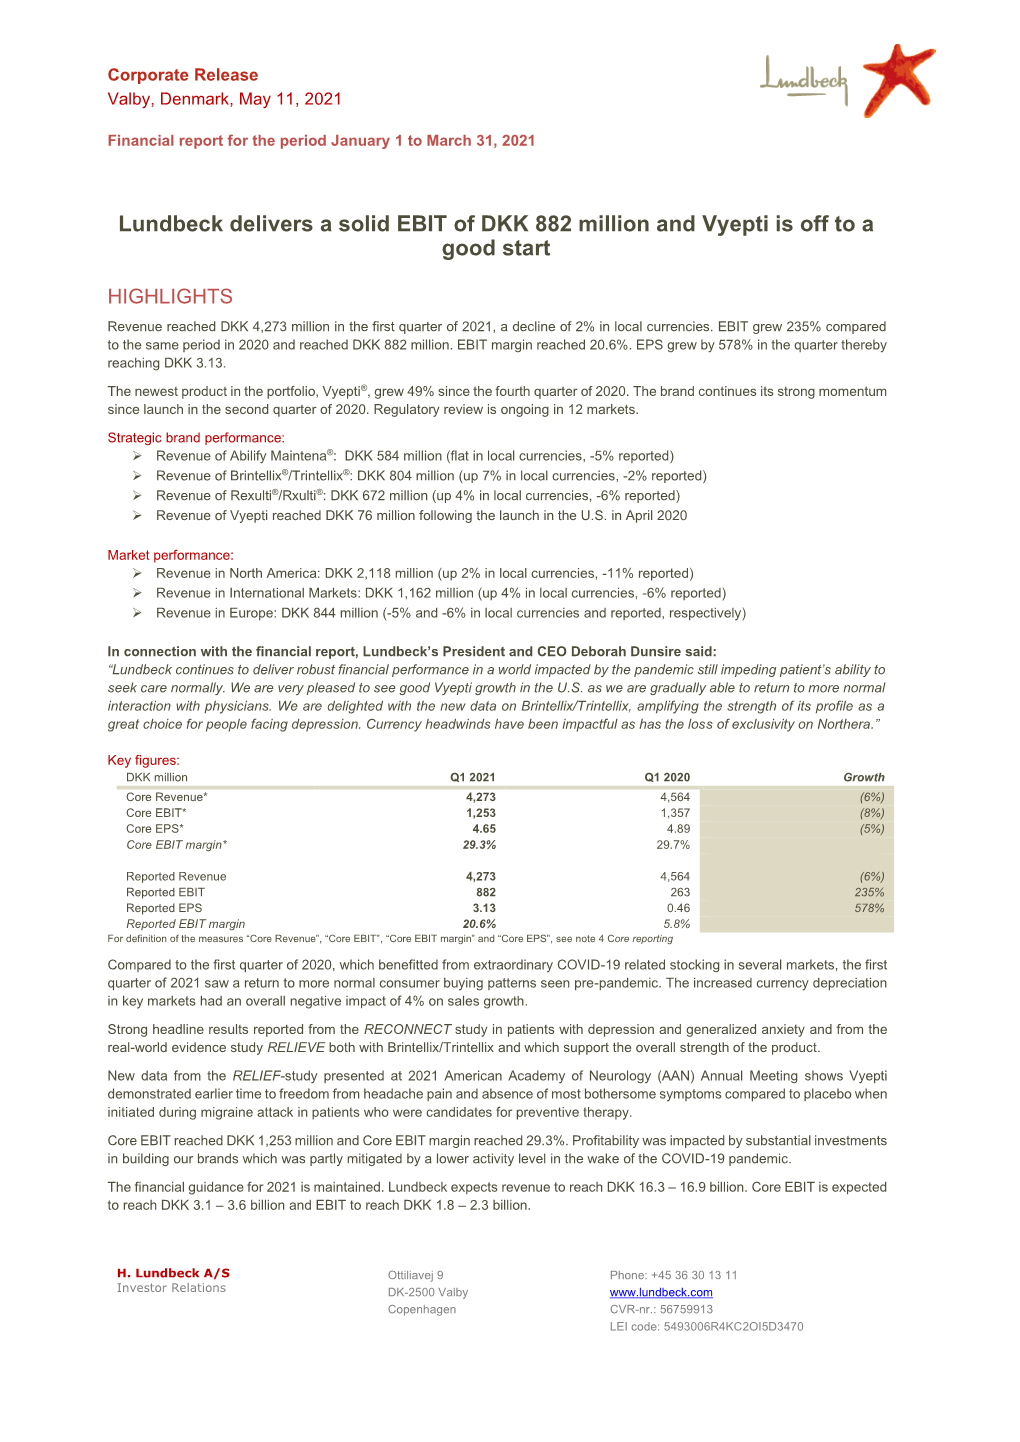 Lundbeck Delivers a Solid EBIT of DKK 882 Million and Vyepti Is Off to a Good Start